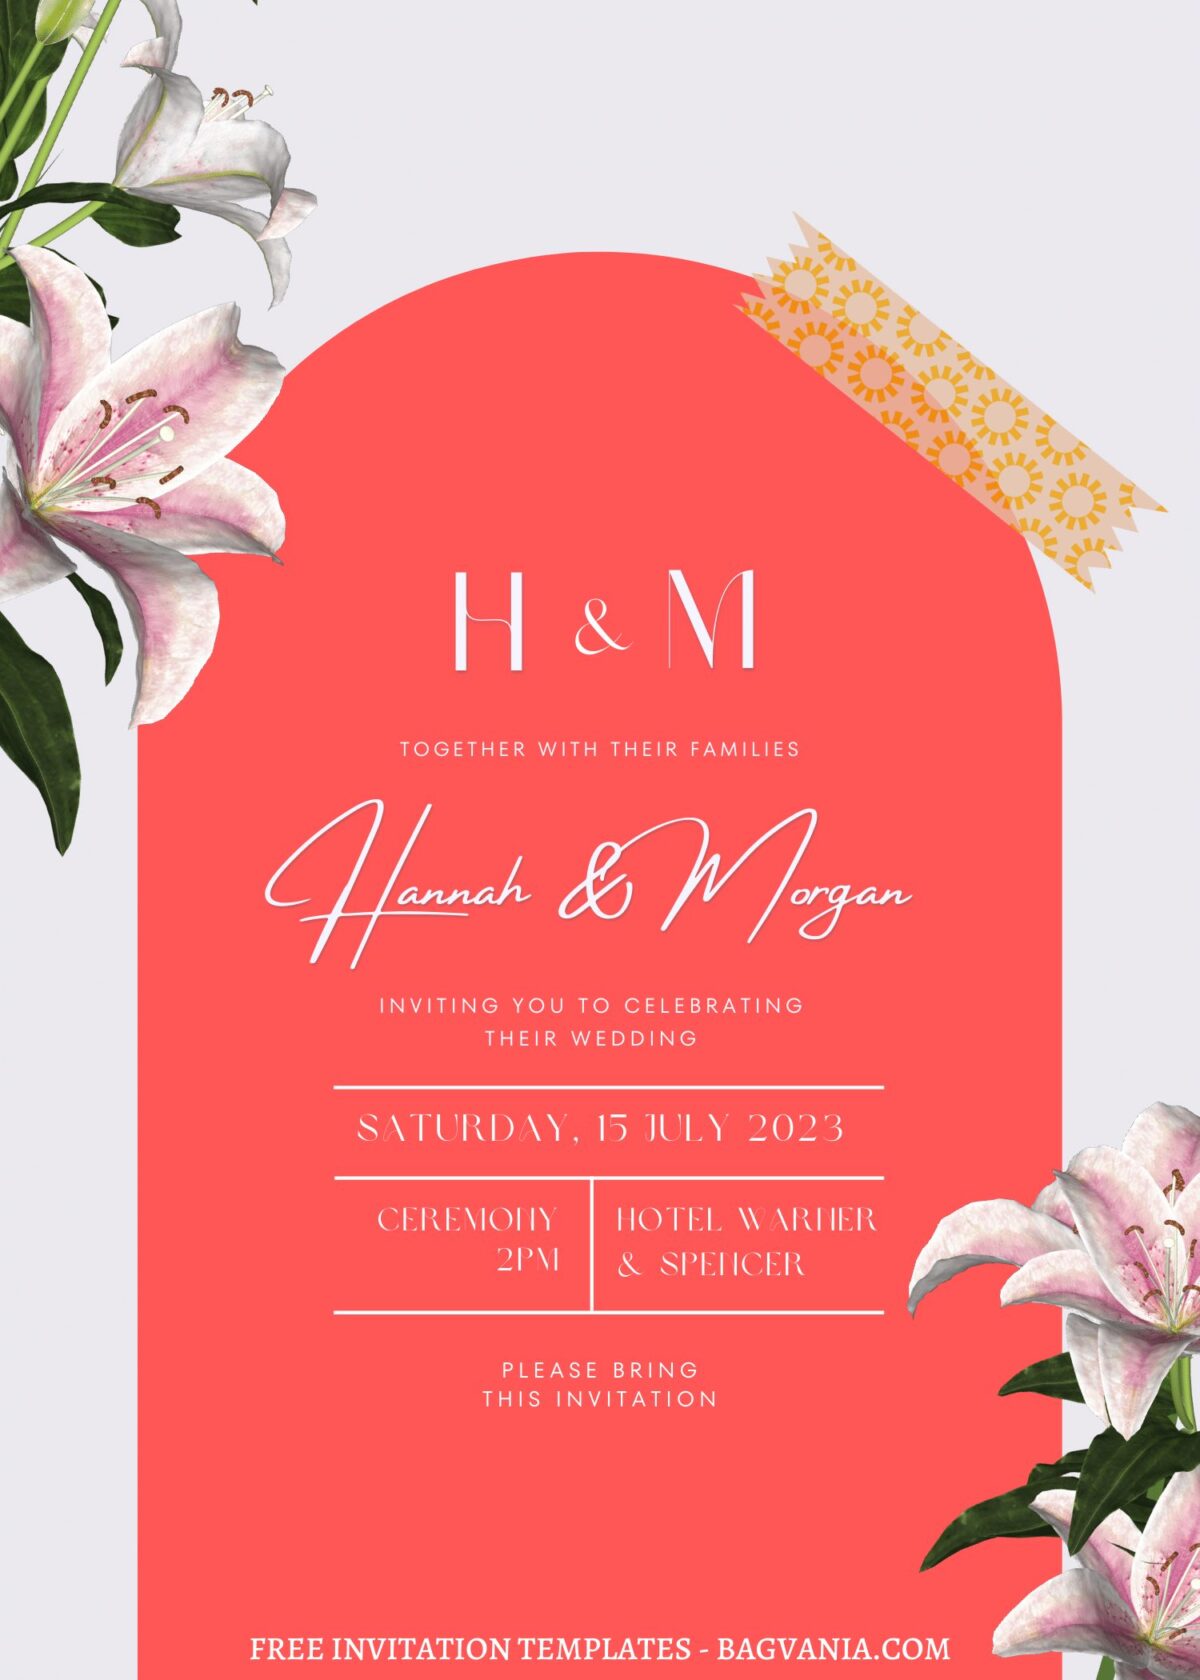 (Free) 7+ Cascading Stargazer Lily Canva Wedding Invitation Templates with watercolor Stargazer lily